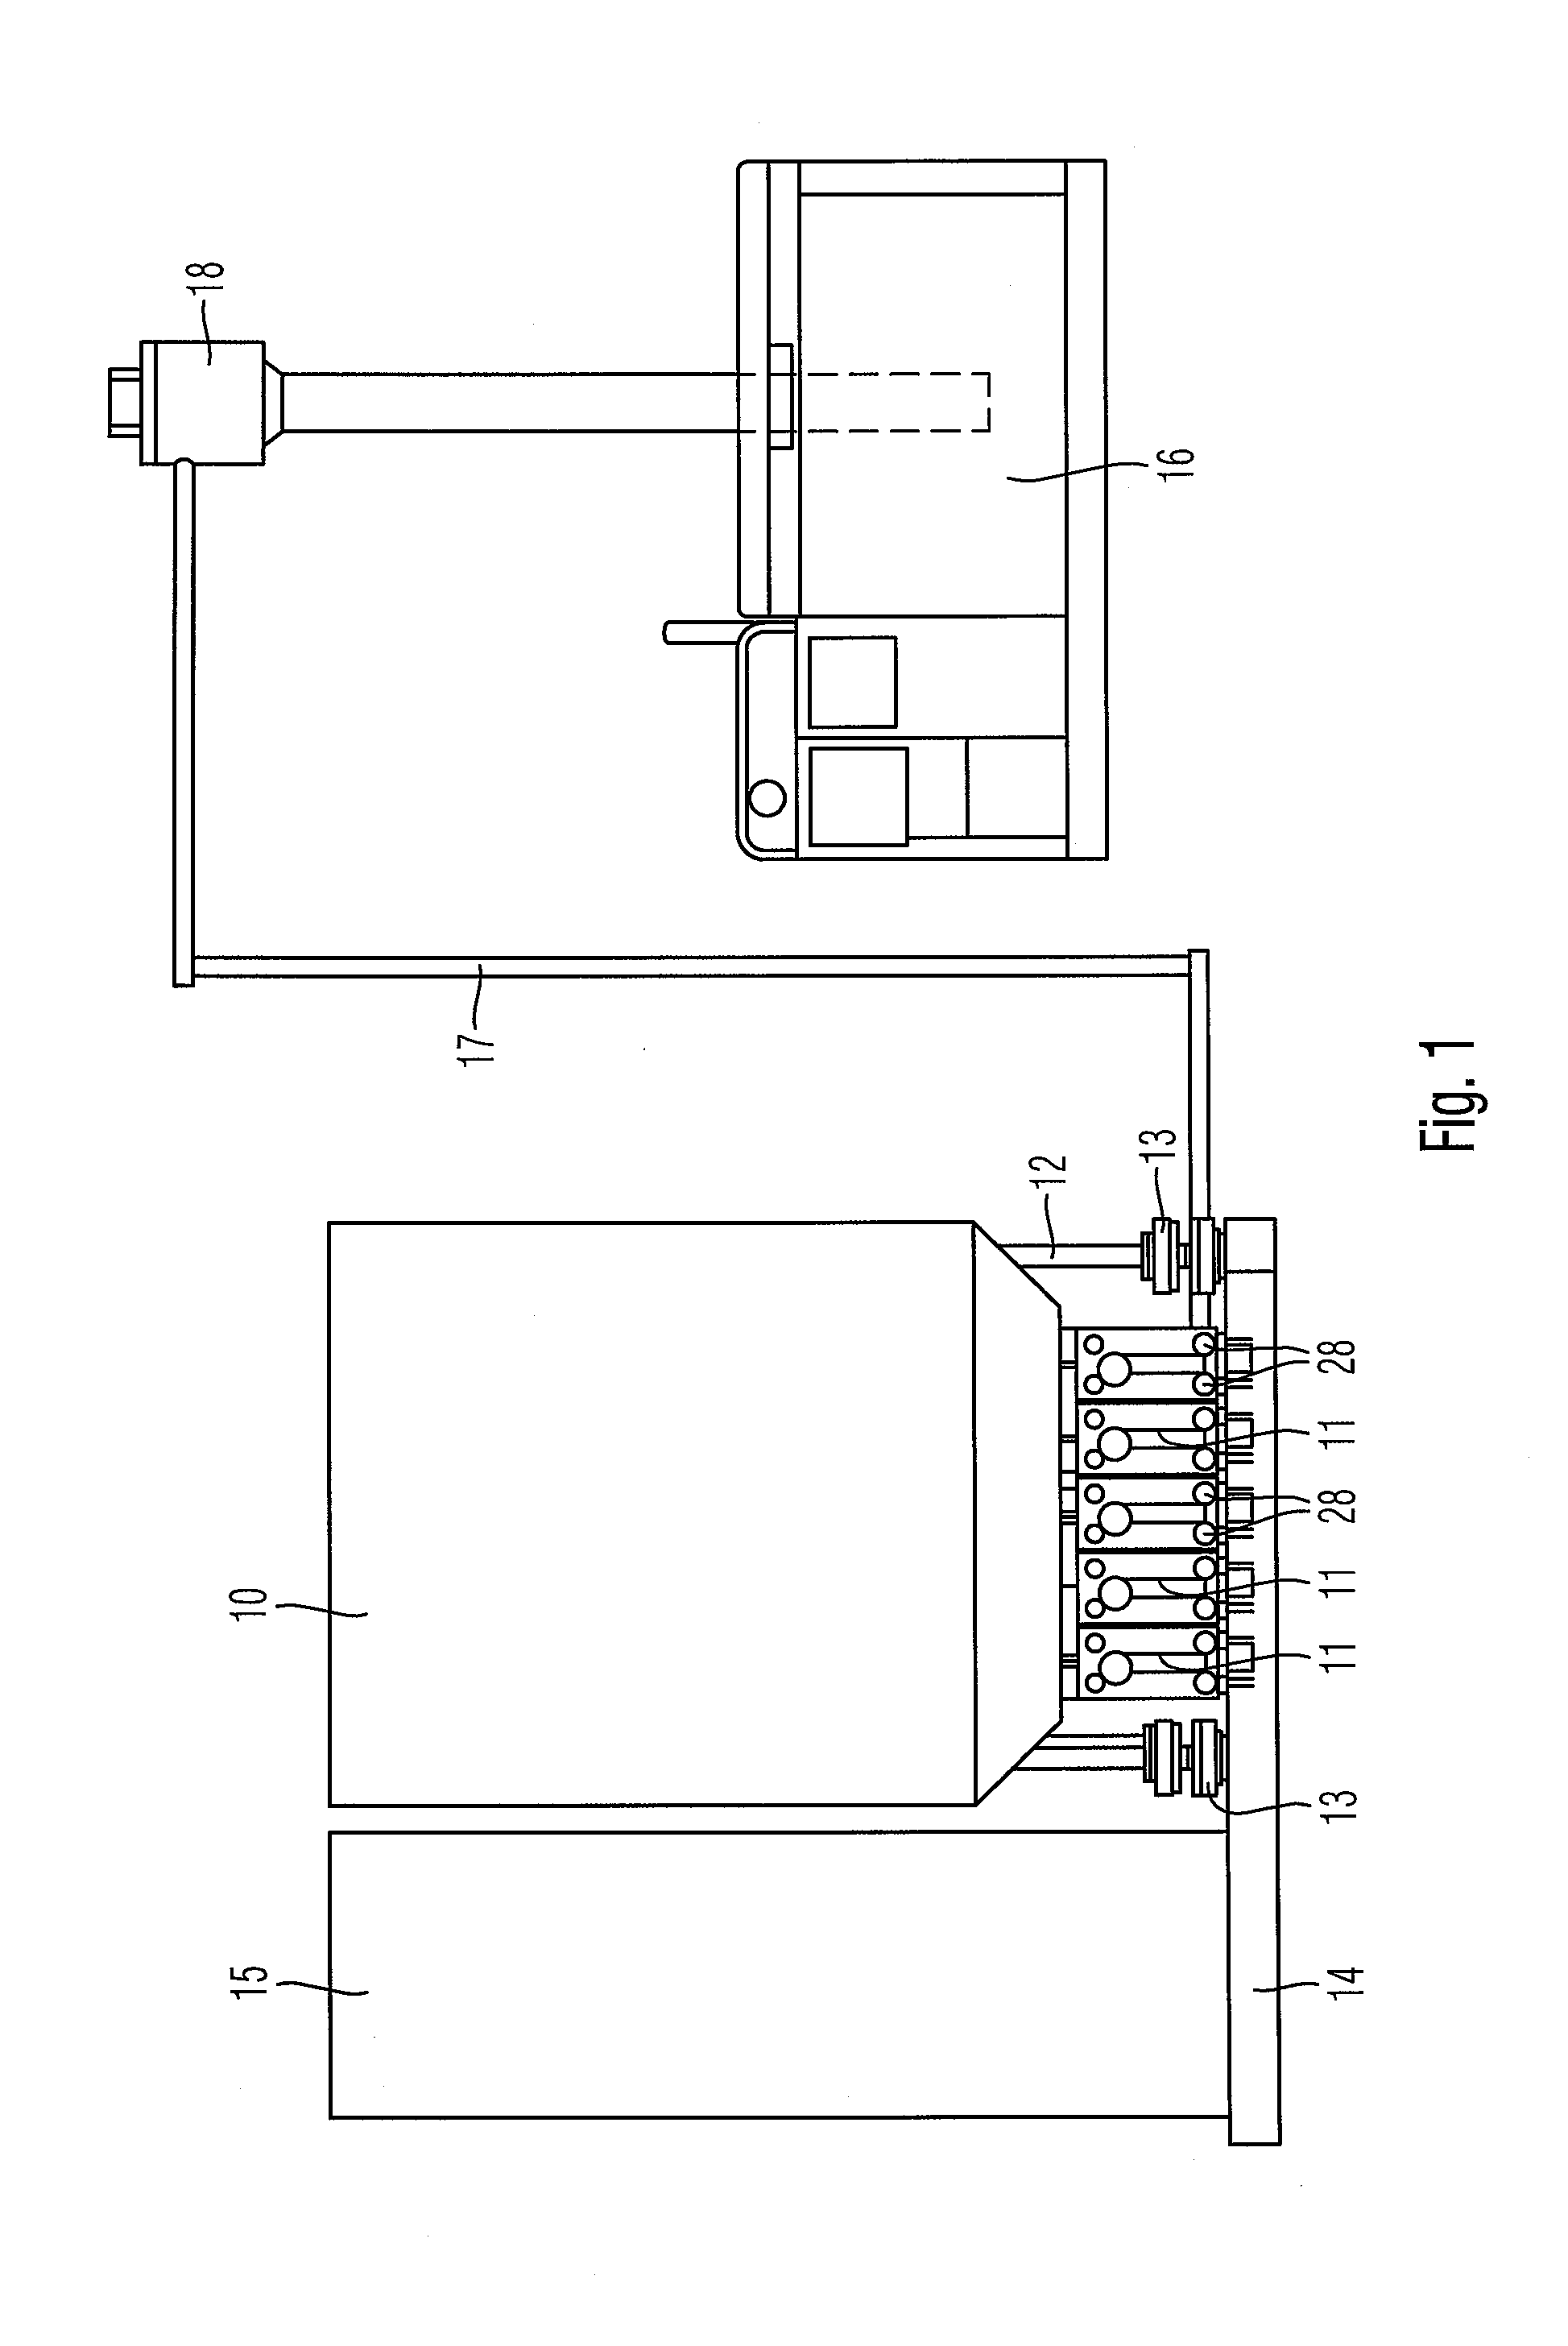 Device and arrangement for filling processing stations